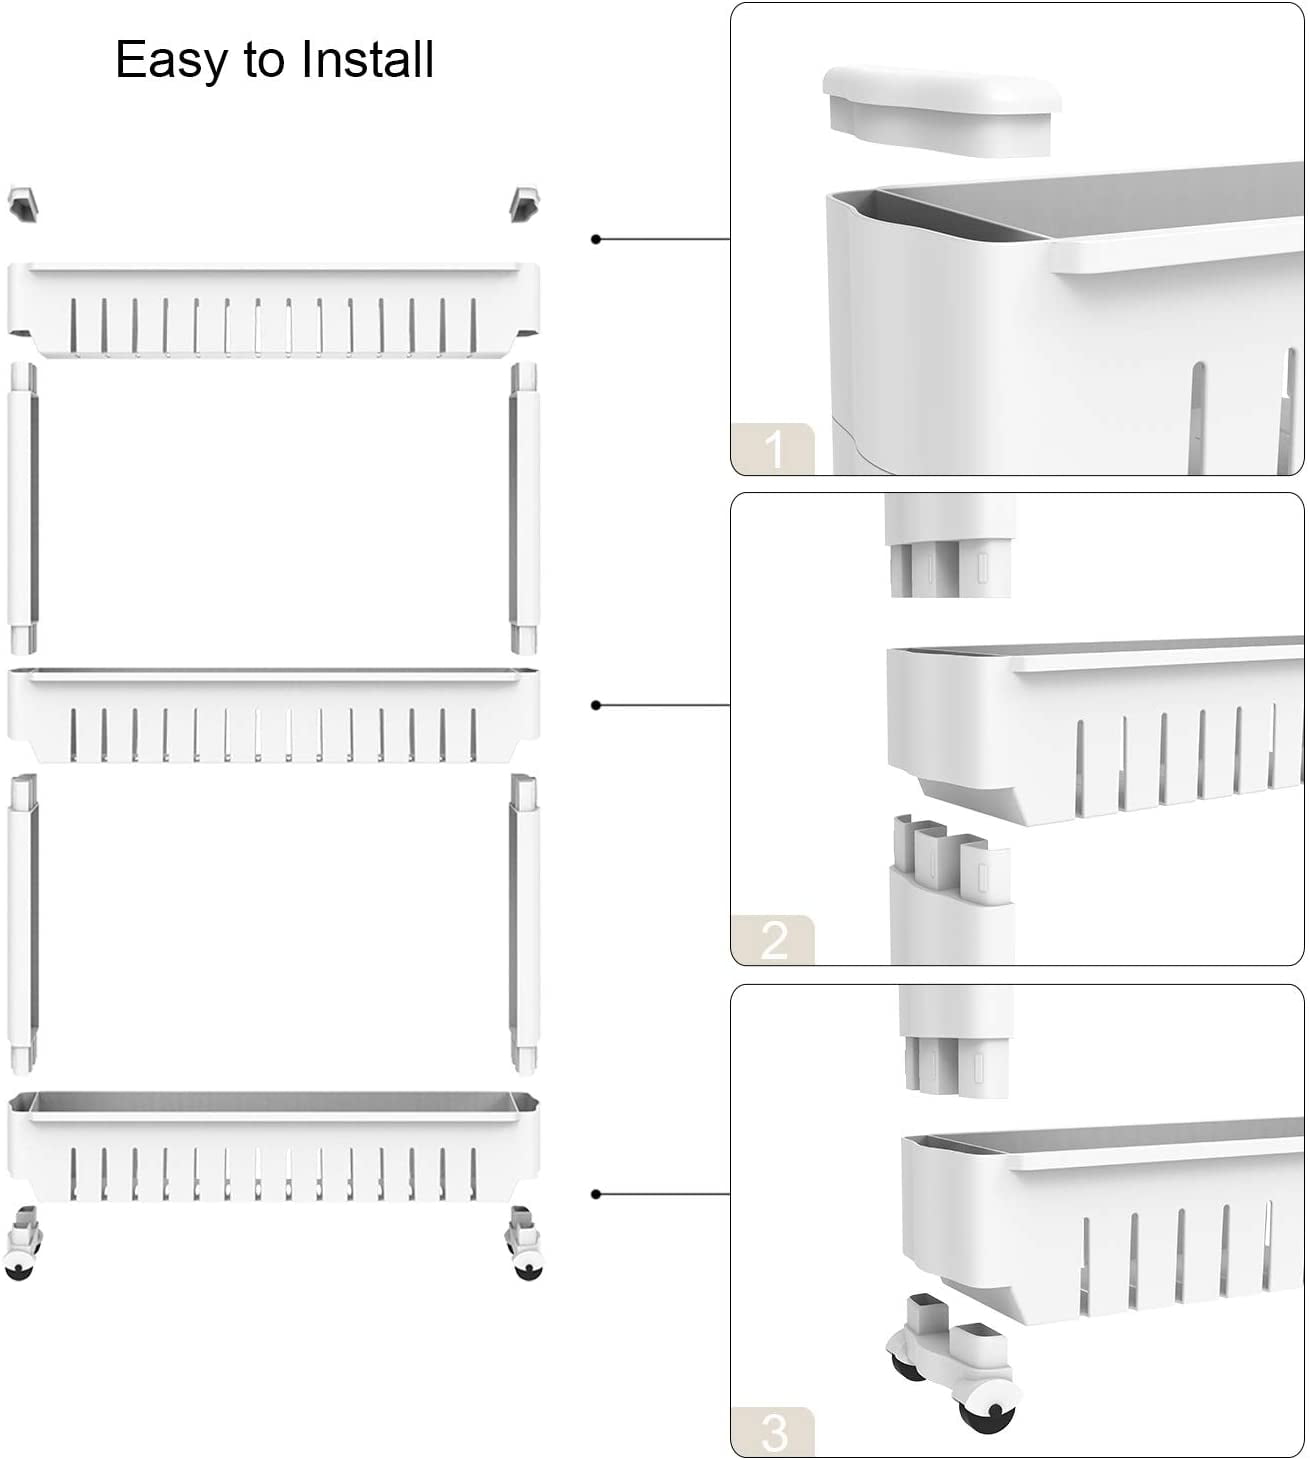 Seenda 3 Tier Slim Slide Out Storage Cart in White， Shelf Tower， Fits， Cabinets. for Small Space Living， Laundry Rooms， Kitchens， Offices